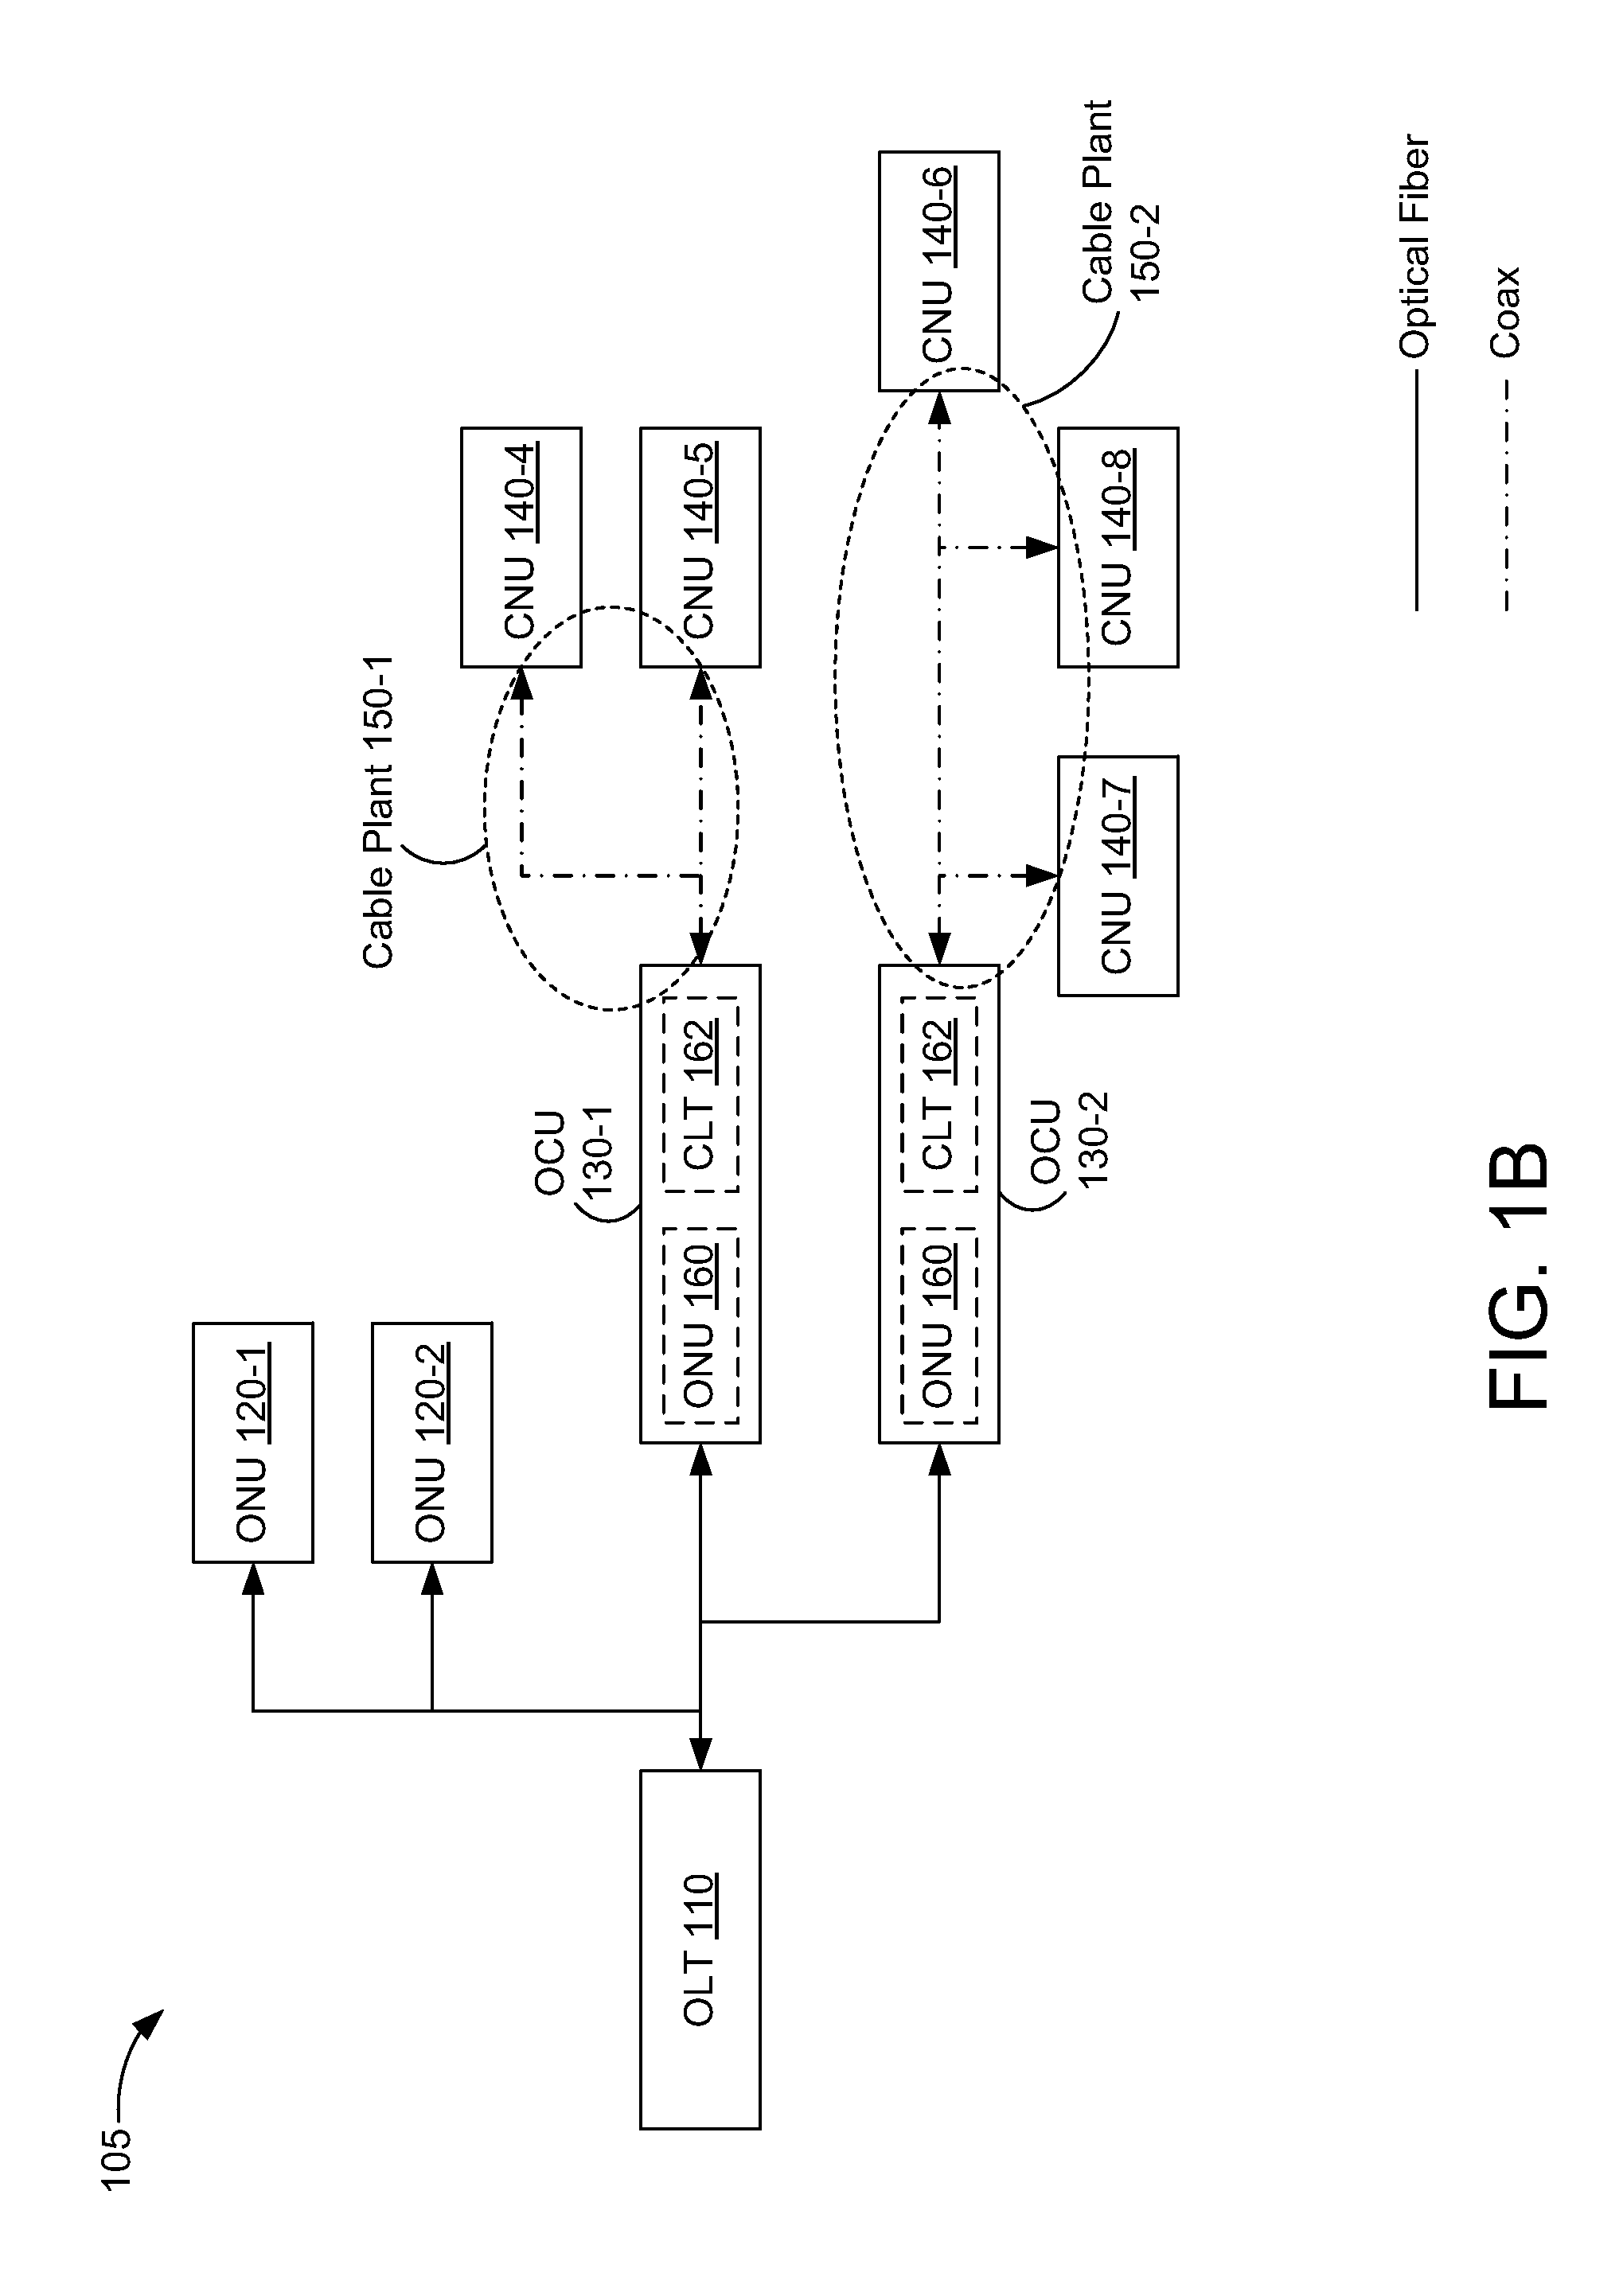 Physical-layer device configurable for time-division duplexing and frequency-division duplexing